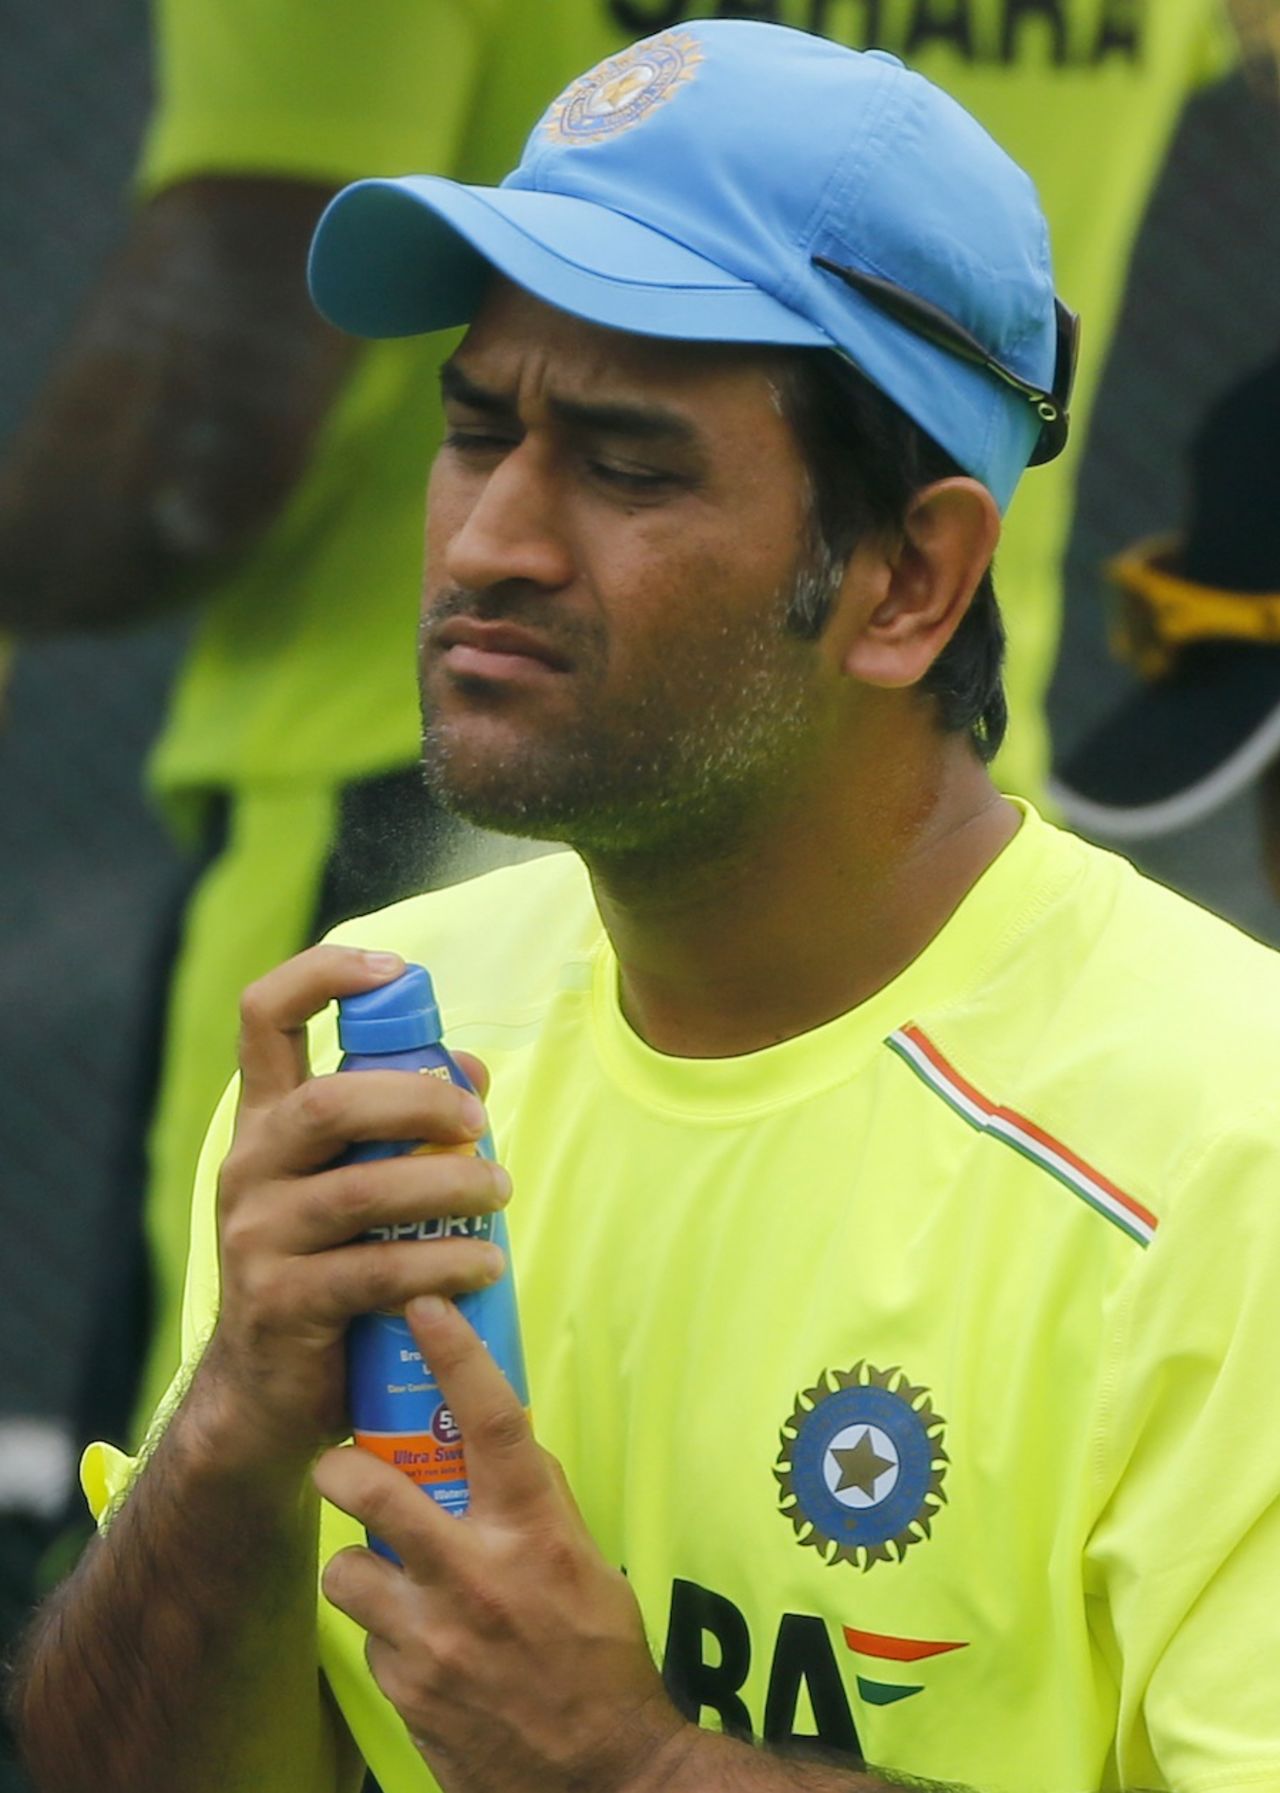 MS Dhoni applies sun cream  during the practice session, World T20 2012, Colombo, September 27, 2012